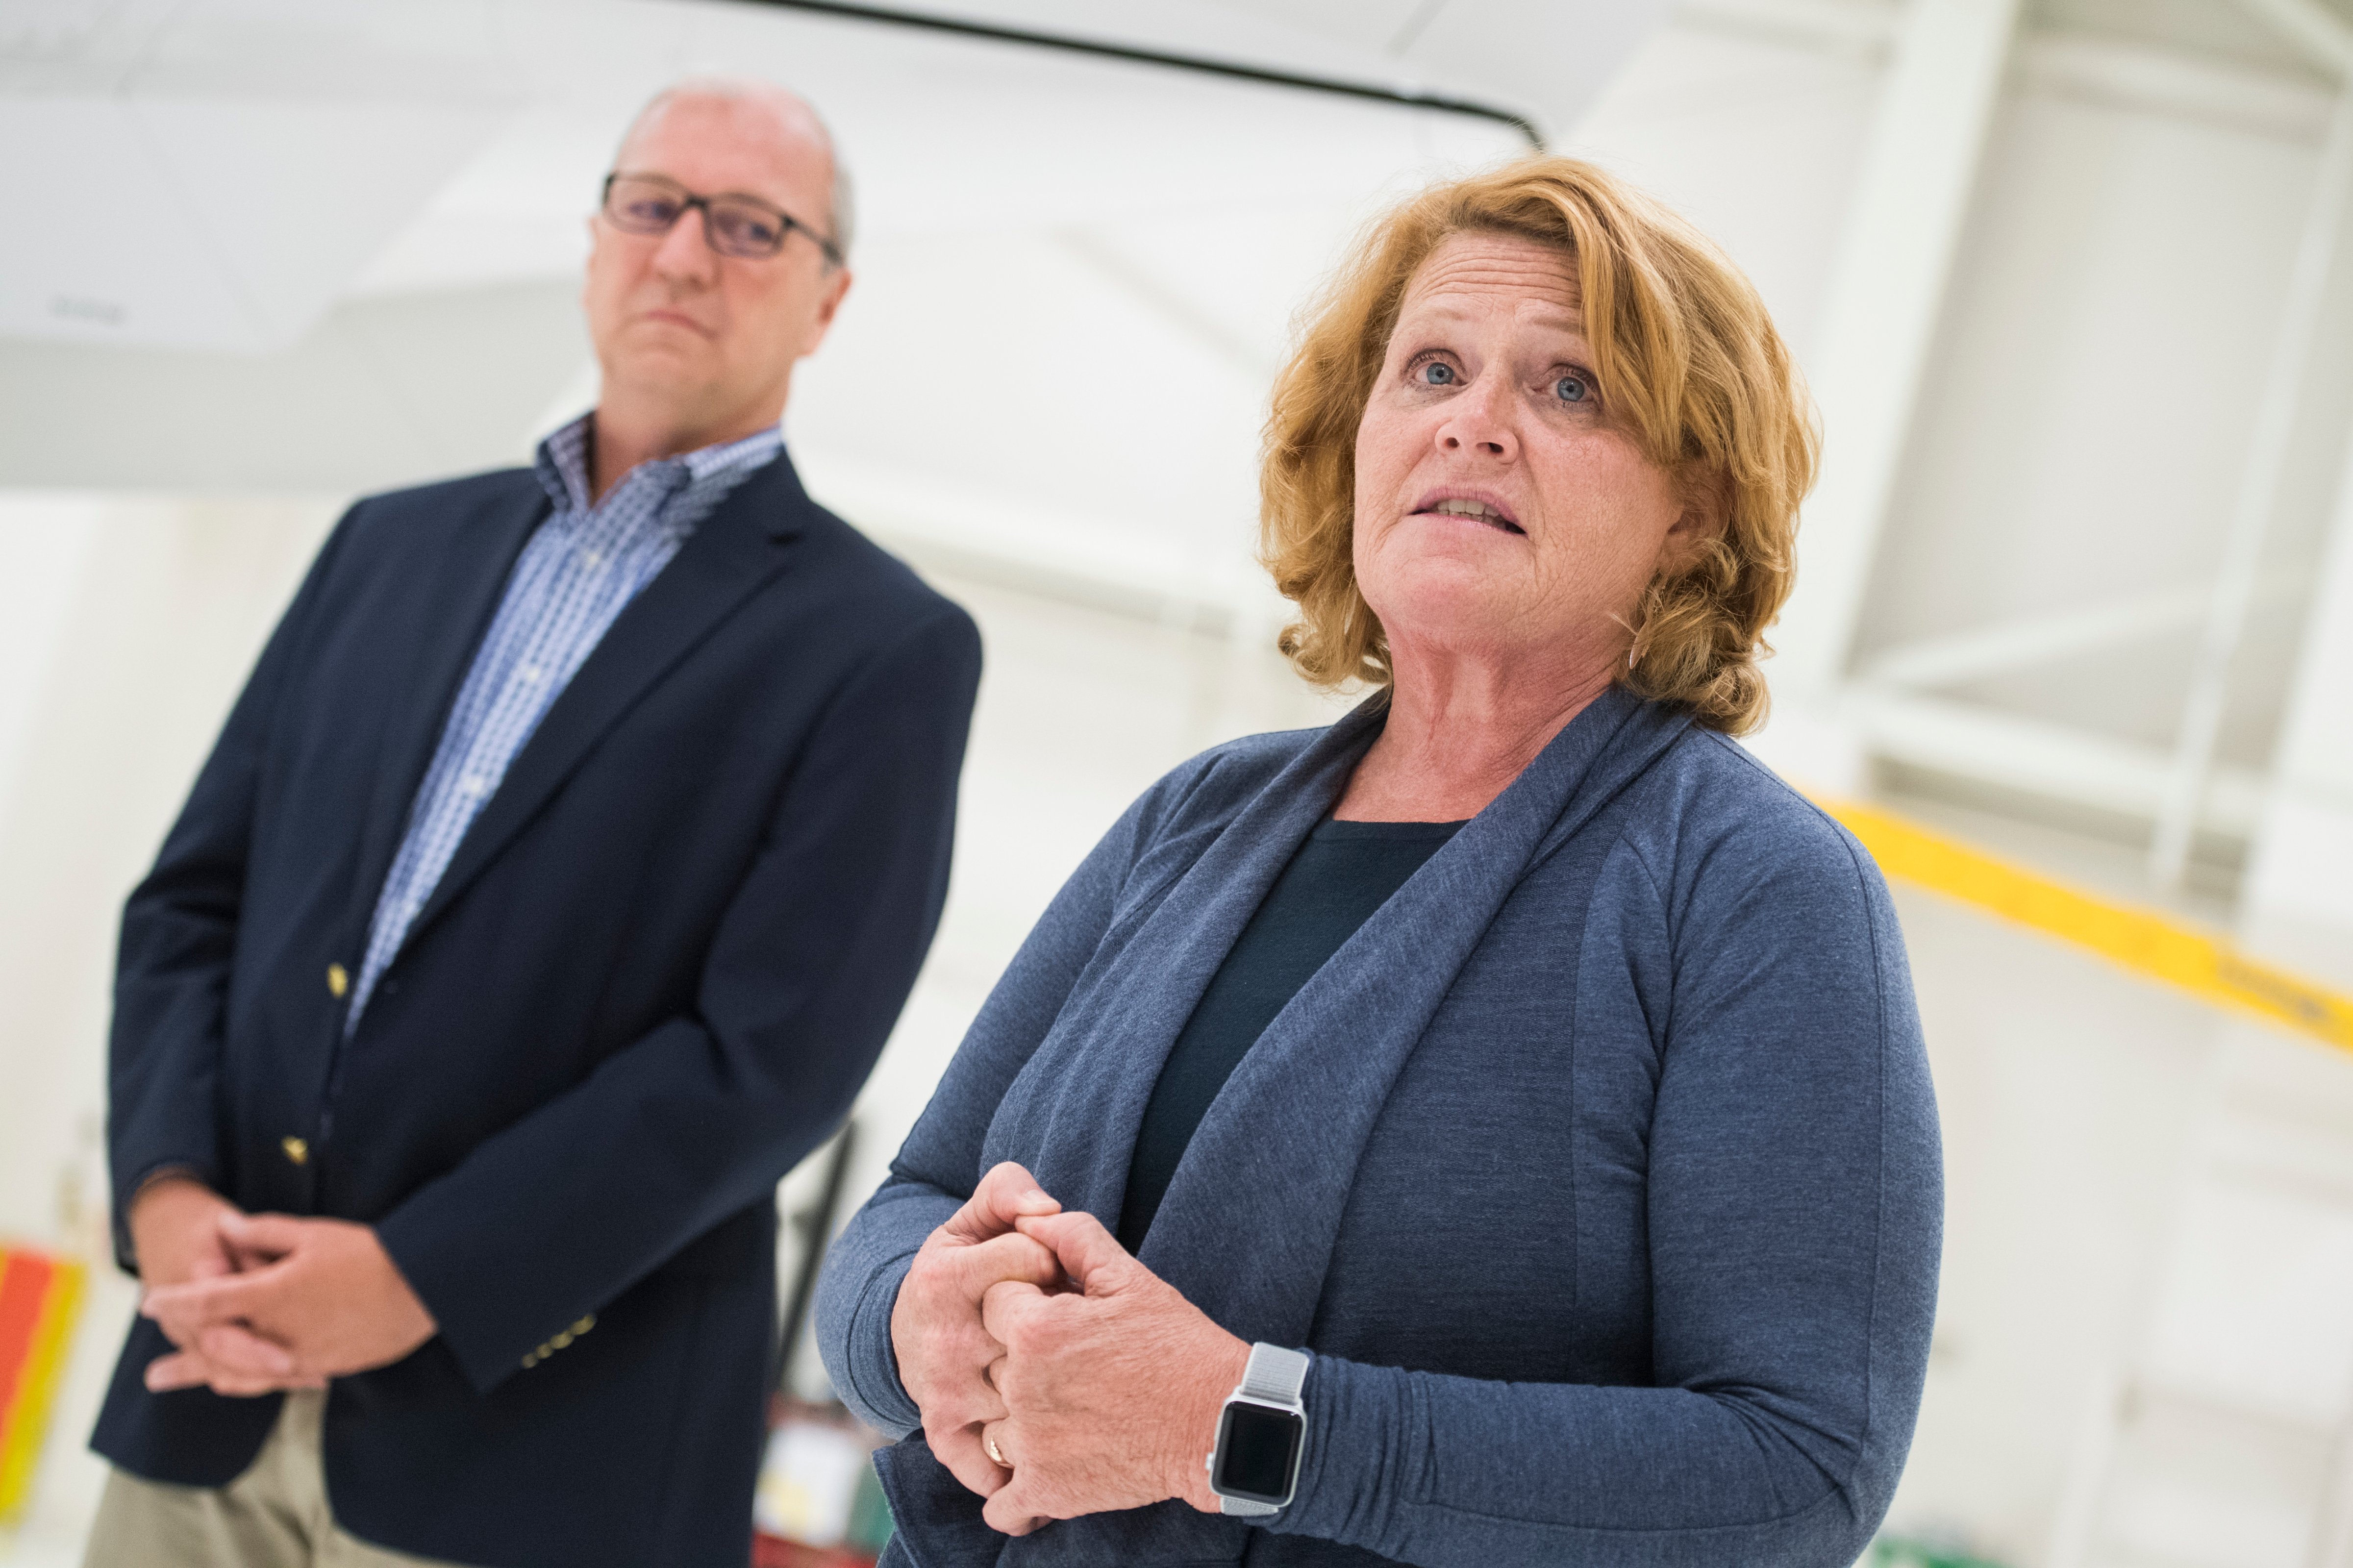 North Dakota Sen. Heidi Heitkamp, a Democrat, and North Dakota Rep. Kevin Cramer, a Republican, attend an event with National Guardsmen in Bismarck, N.D., on Aug. 17, 2018. (Tom Williams—CQ-Roll Call,Inc./Getty Images)